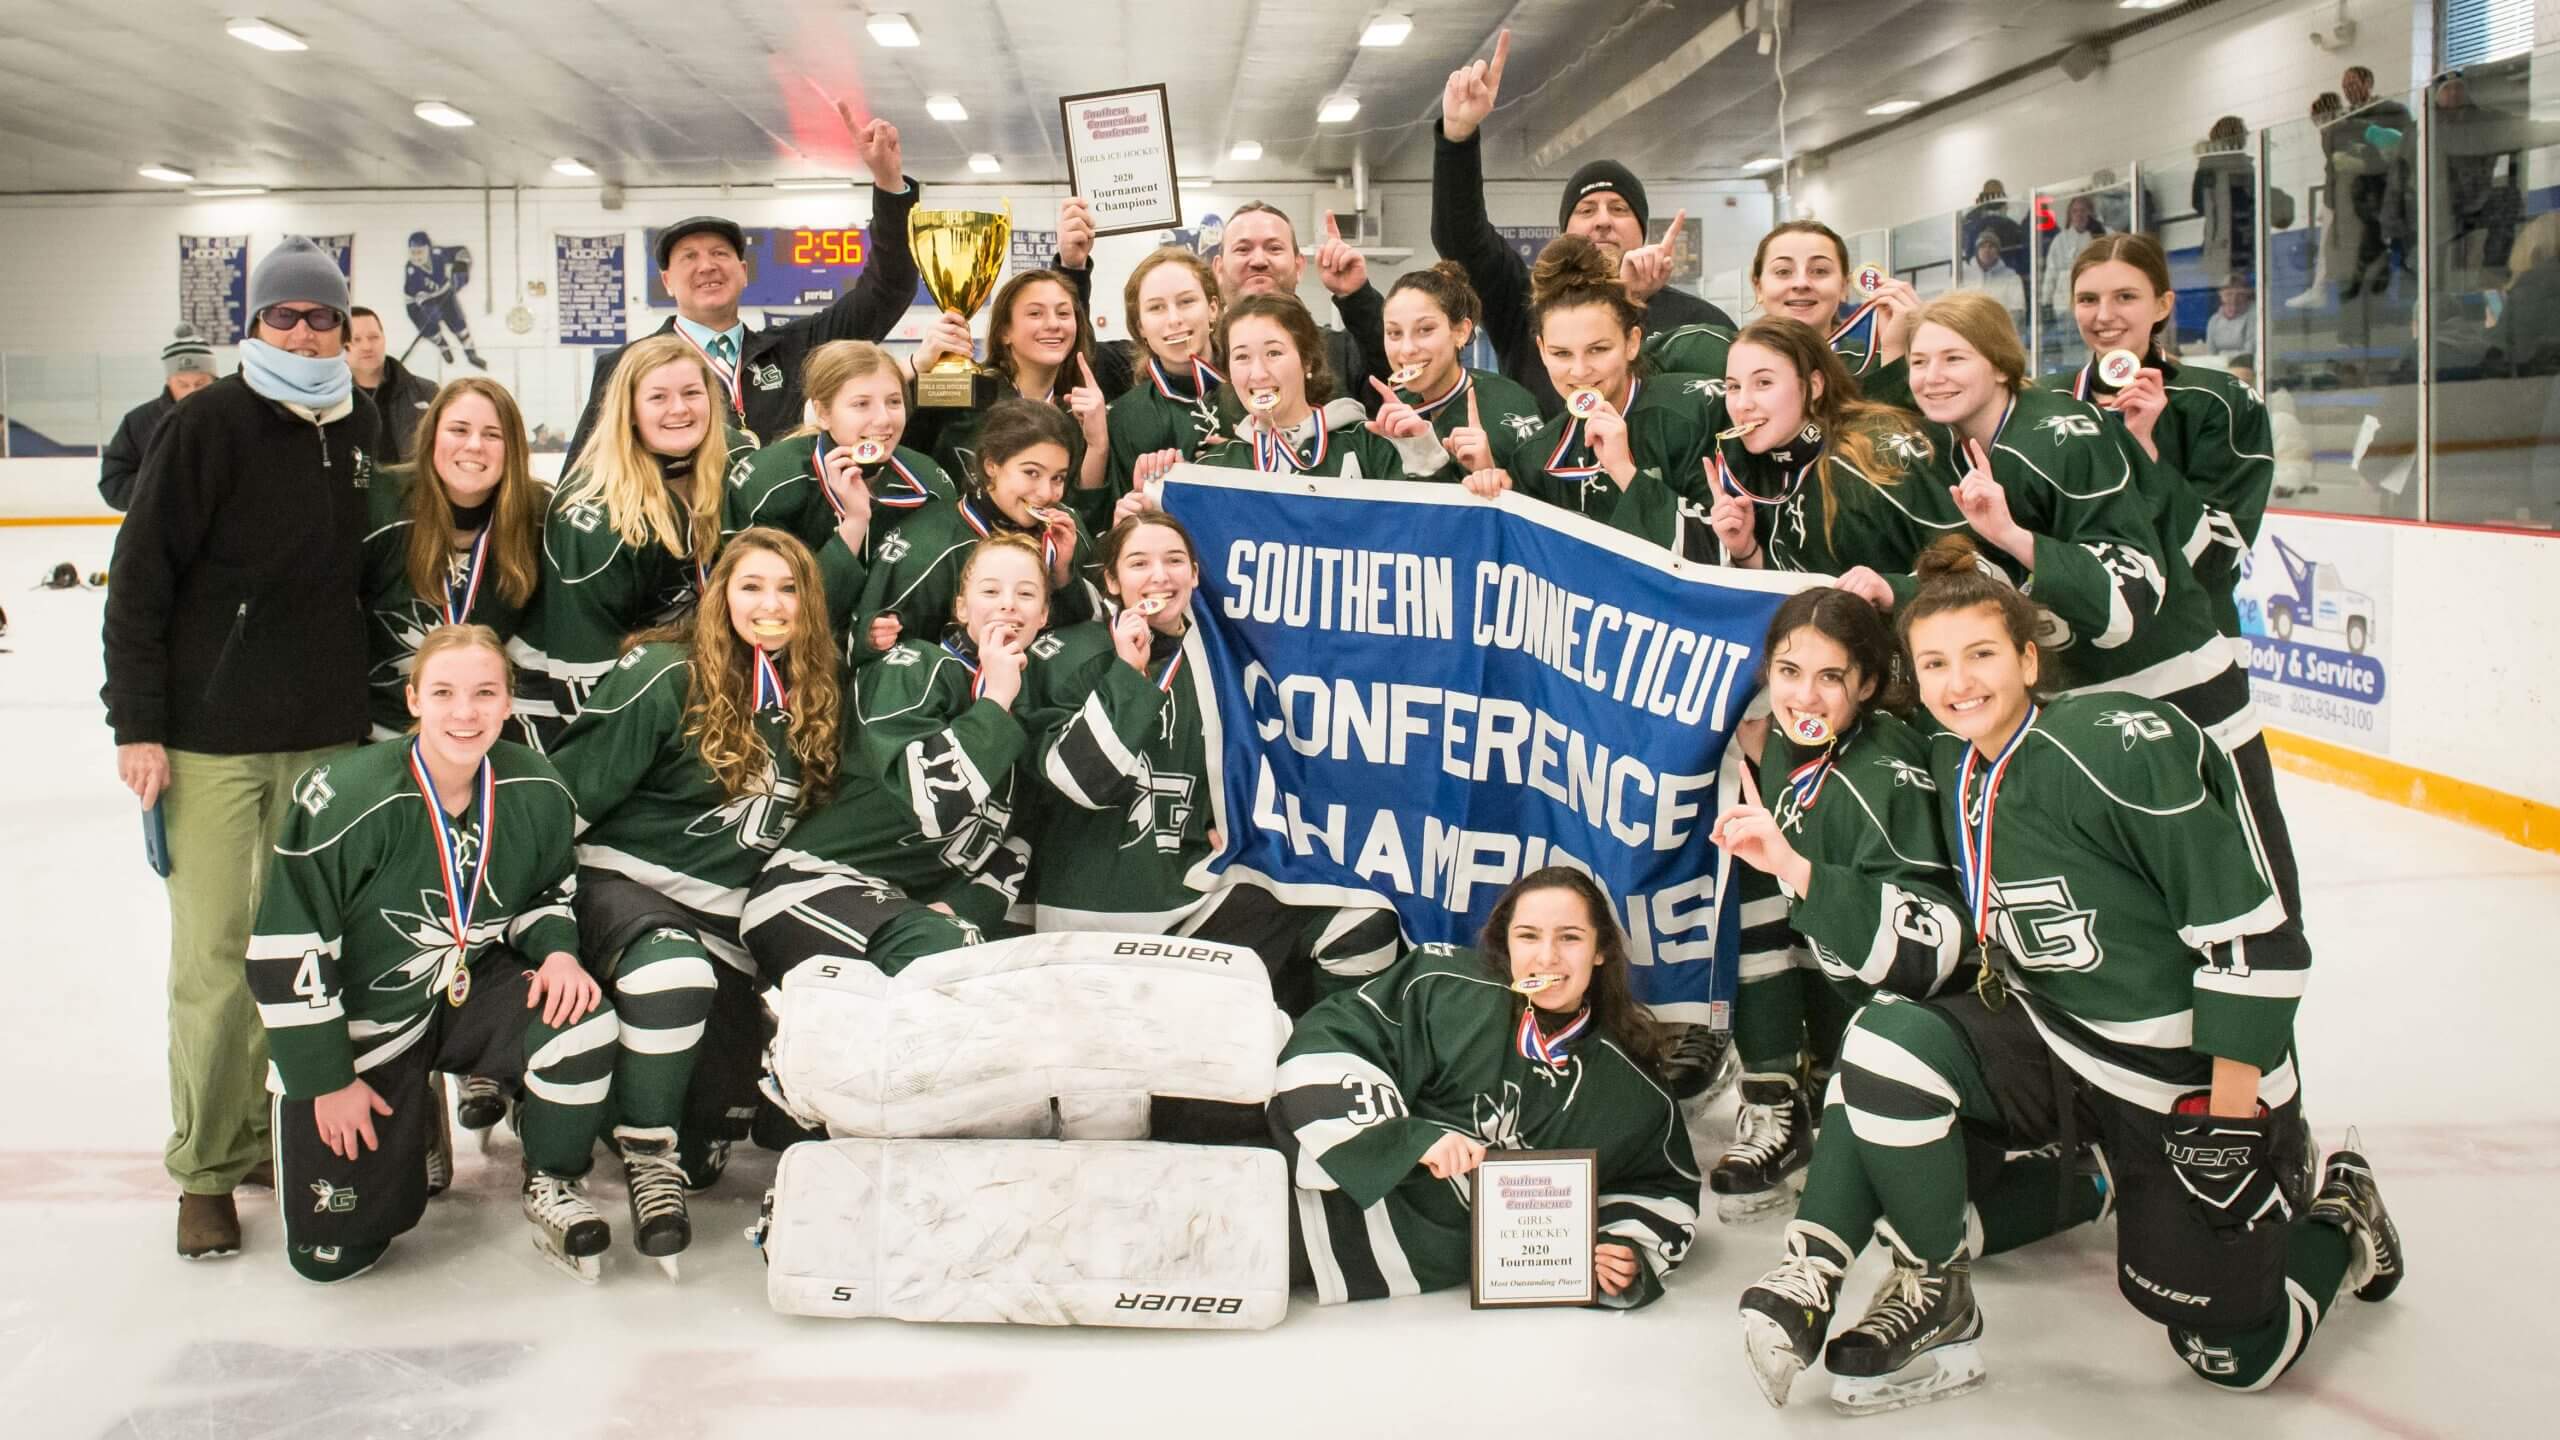 Young female hockey players in uniform positioned in a group photo beside several adults in casual clothing. Everyone is smiling and a trophy is held up by a player. The girls hold up a sign that reads "Southern Connecticut Conference Champions."